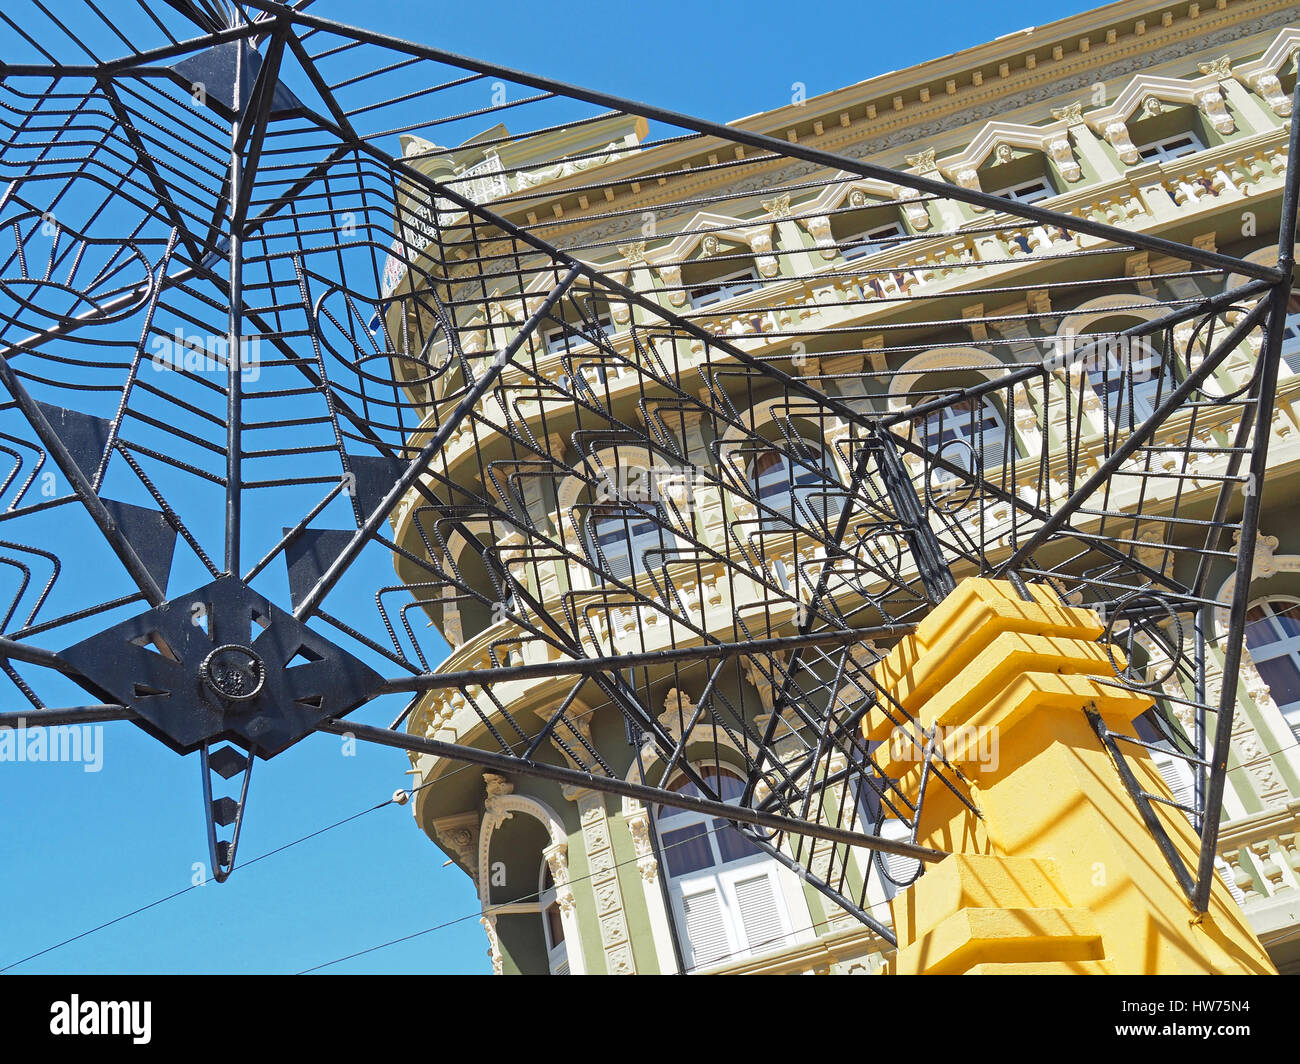 Modern sculpture in front of Imperial Hotel. Stock Photo